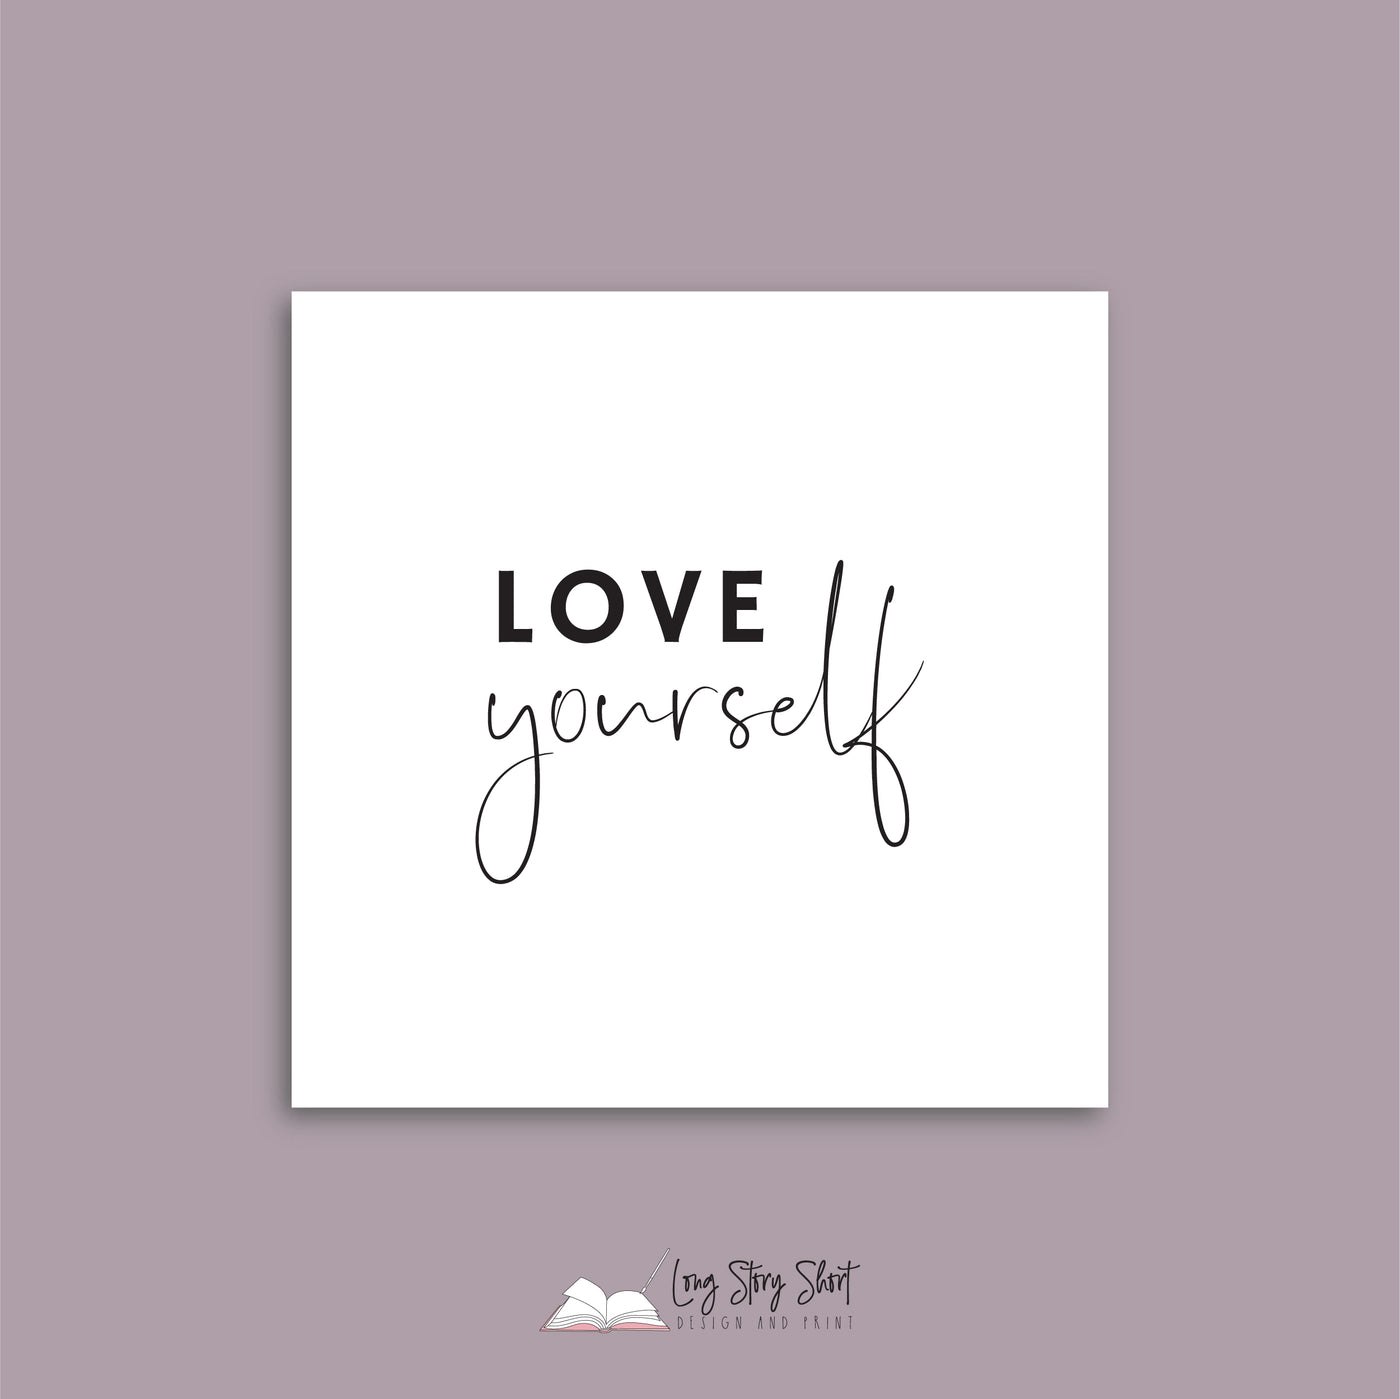 White Love Yourself Vinyl Label Pack